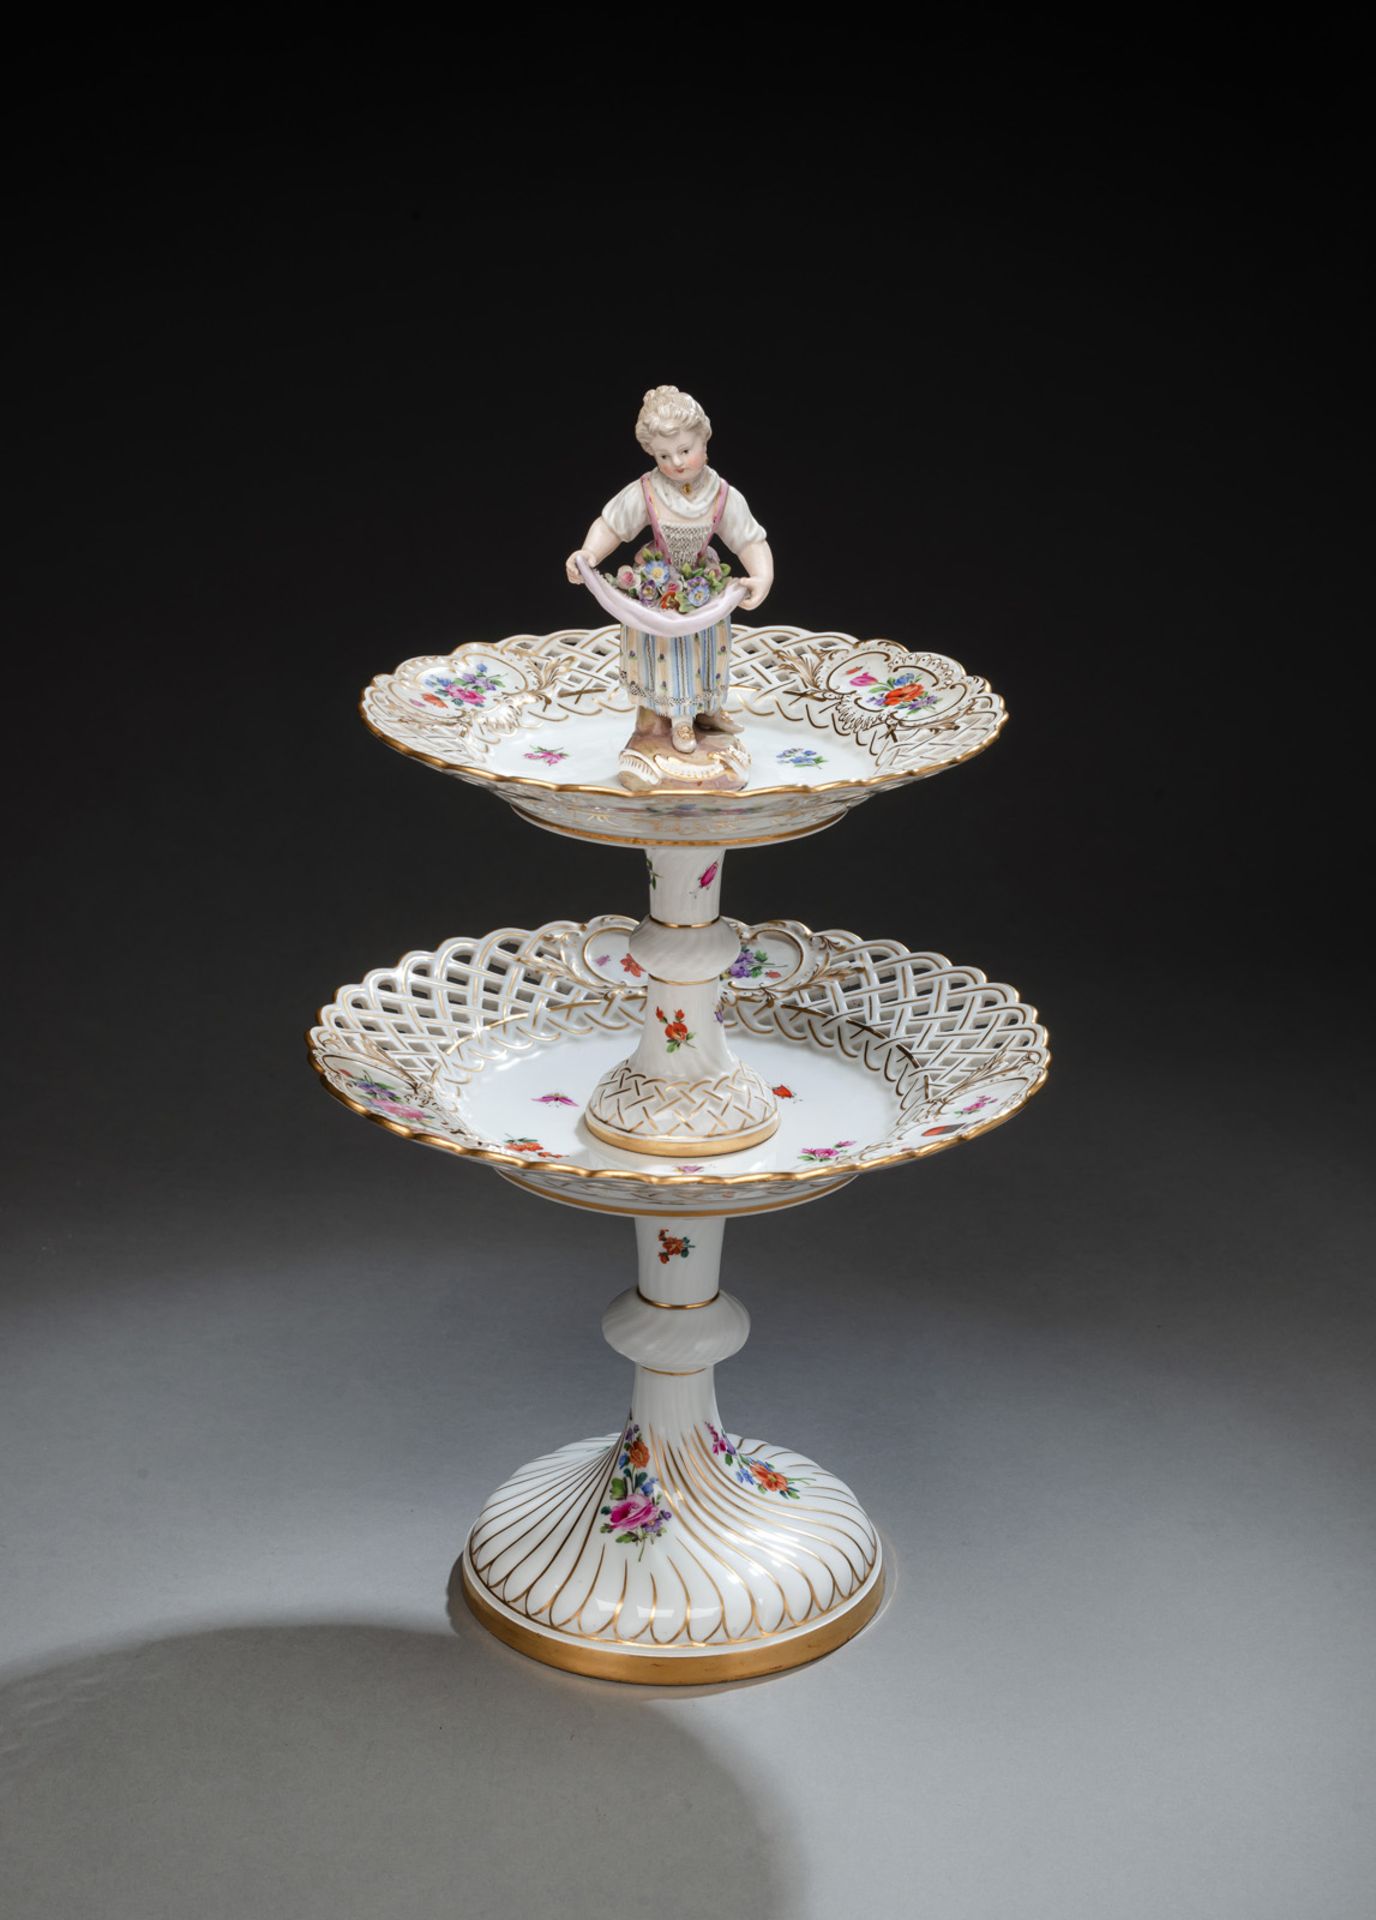 A MEISSEN FLORAL AND INSECT TOOLED CENTRE PIECE WITH A PRINCELY COAT OF ARMS